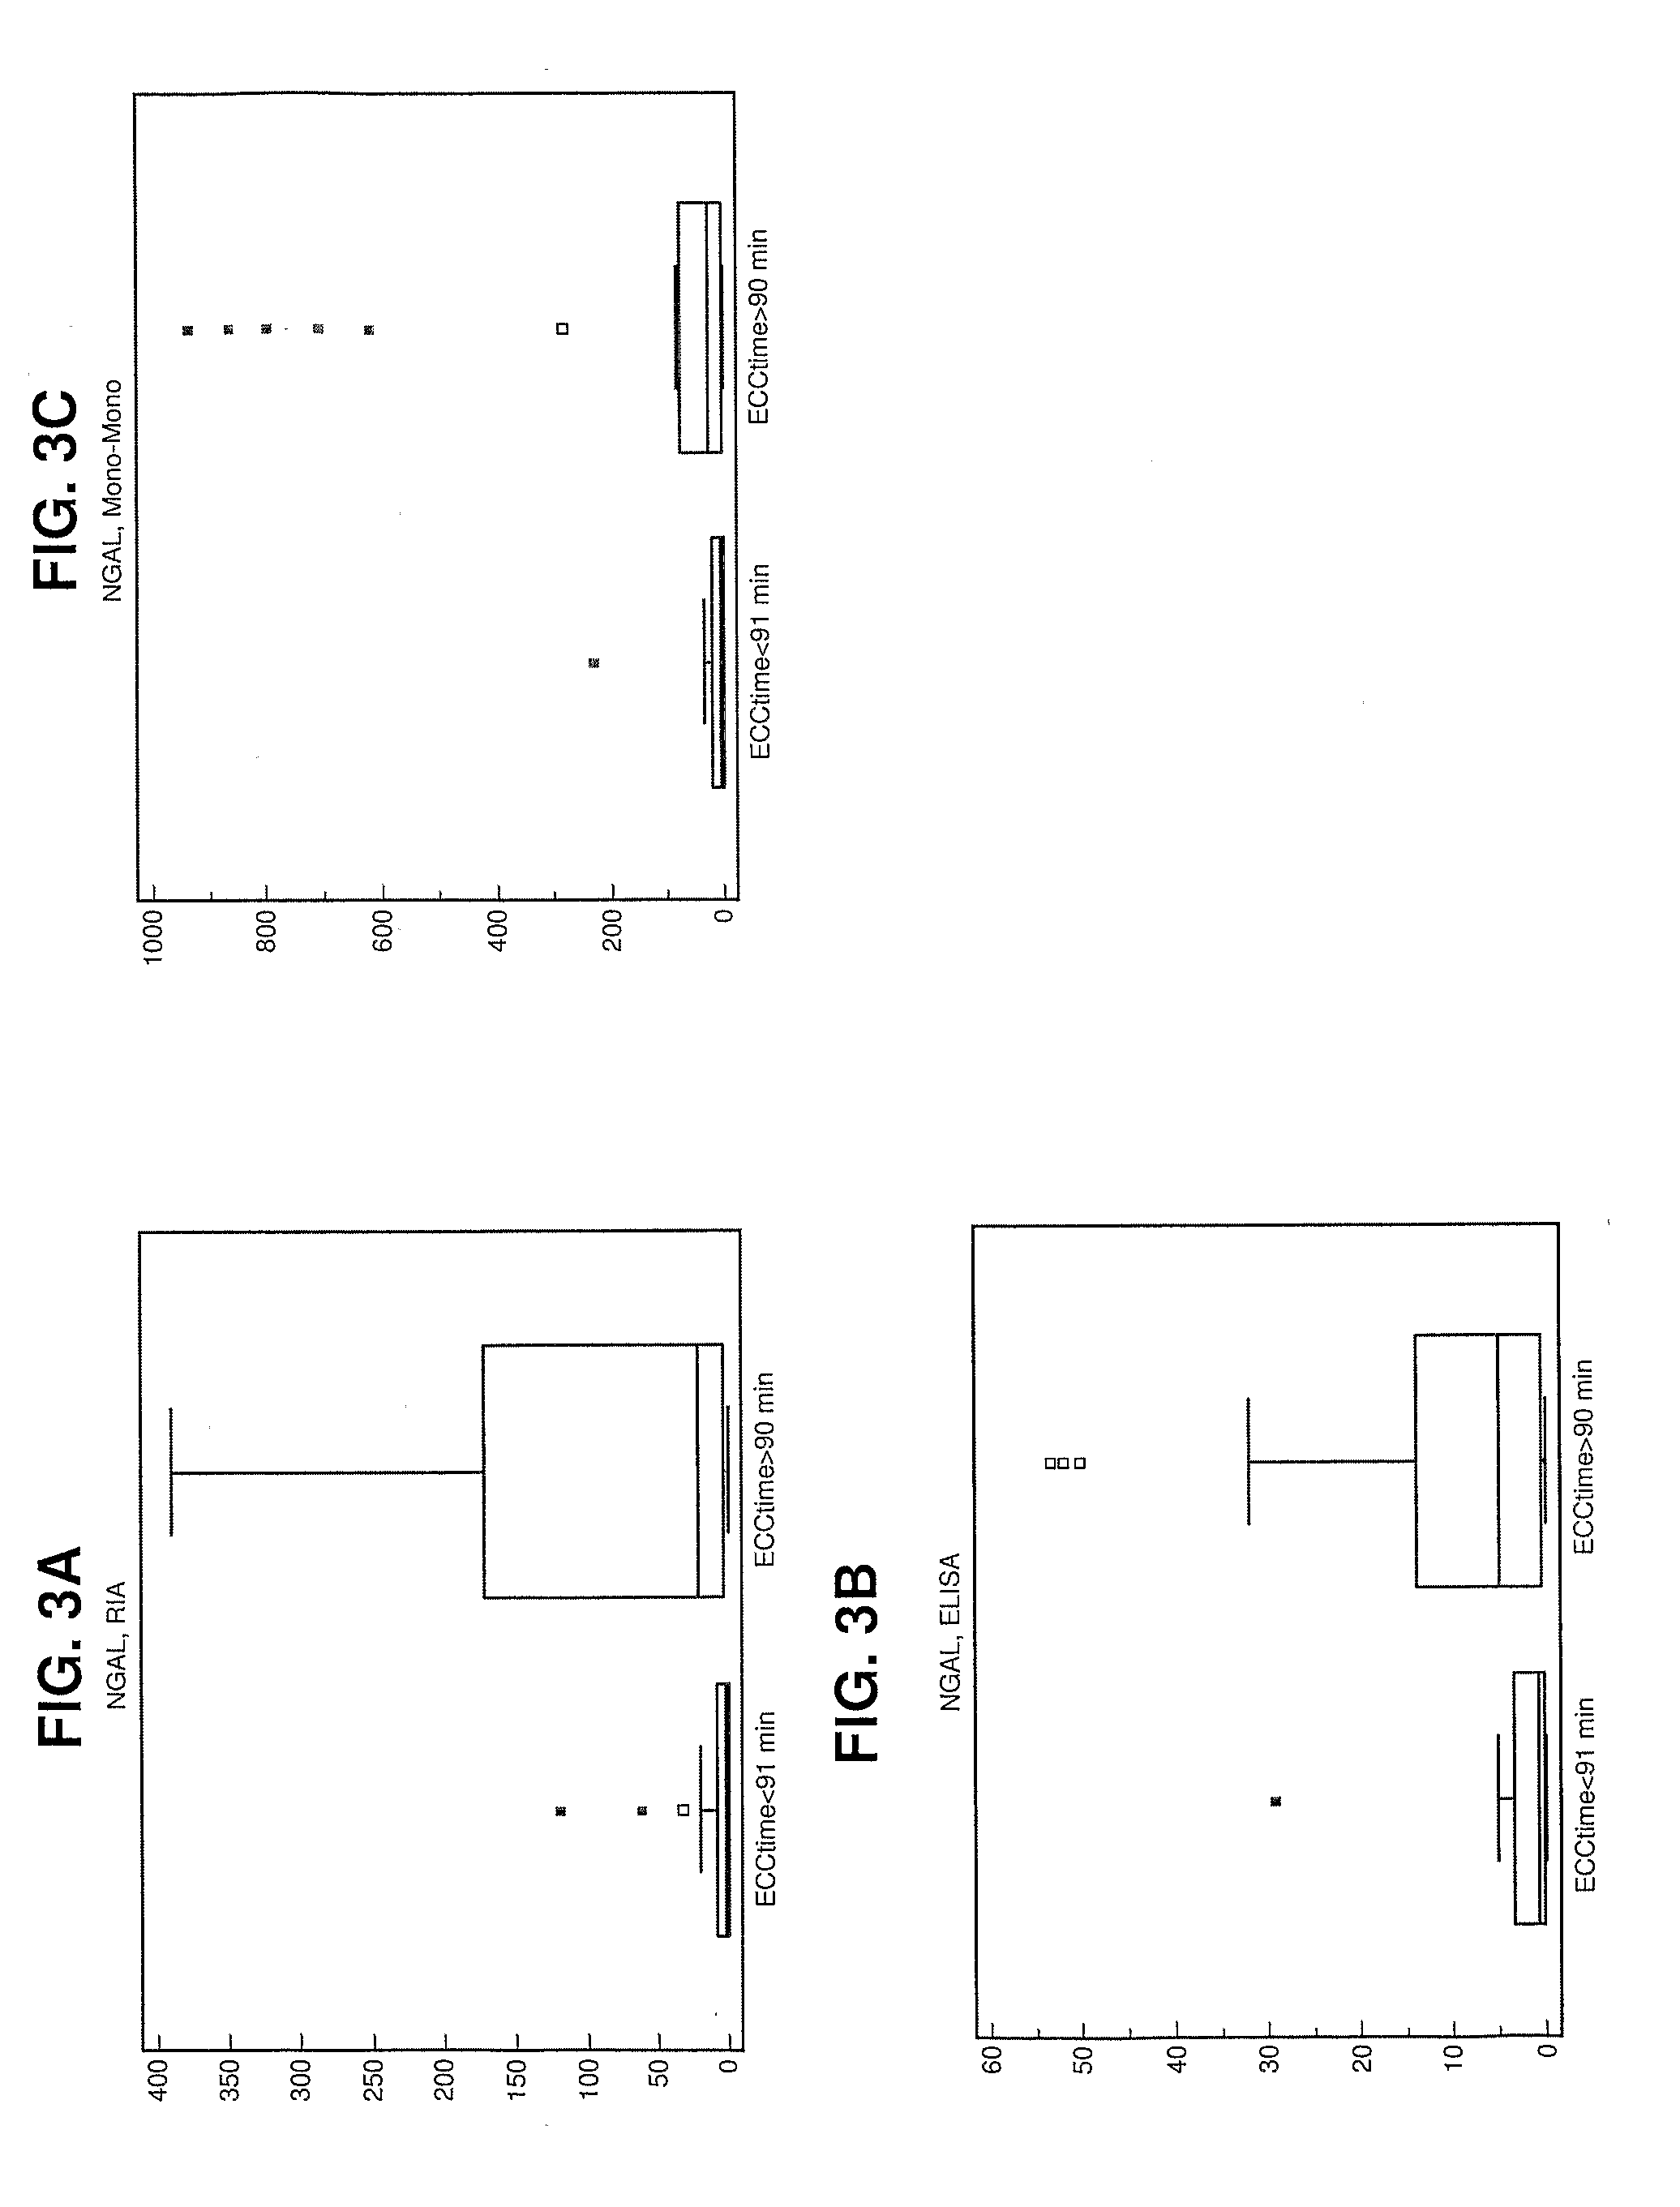 Methods, Devices and Kits for Detecting or Monitoring Acute Kidney Injury